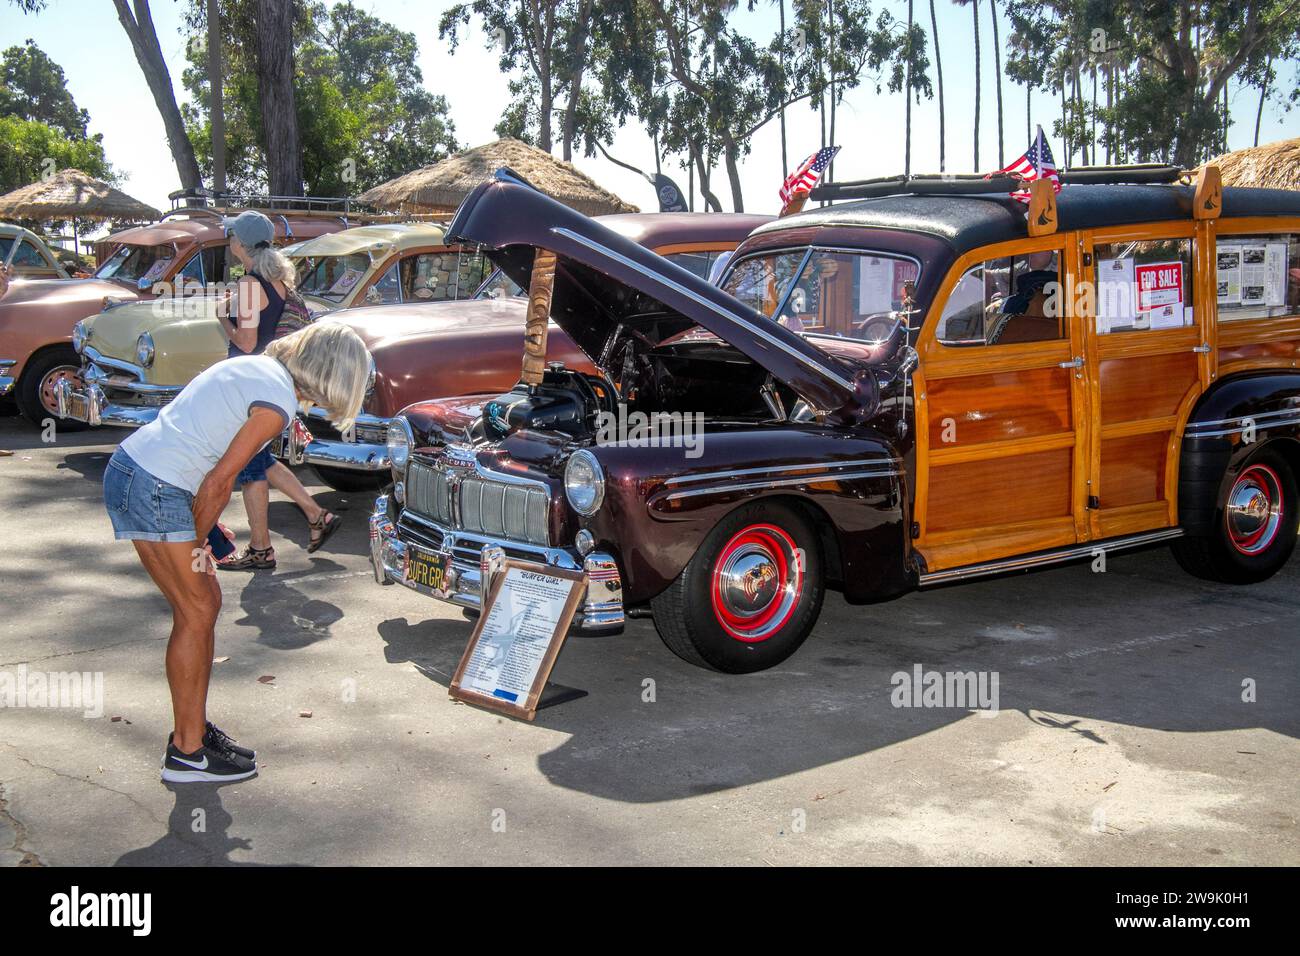 A 1946 Mercury Model 114 'woodie' station wagon is on display at a vintage car rally in Dana Point, CA. Note 'Surfer Gal' vanity license plate. Stock Photo